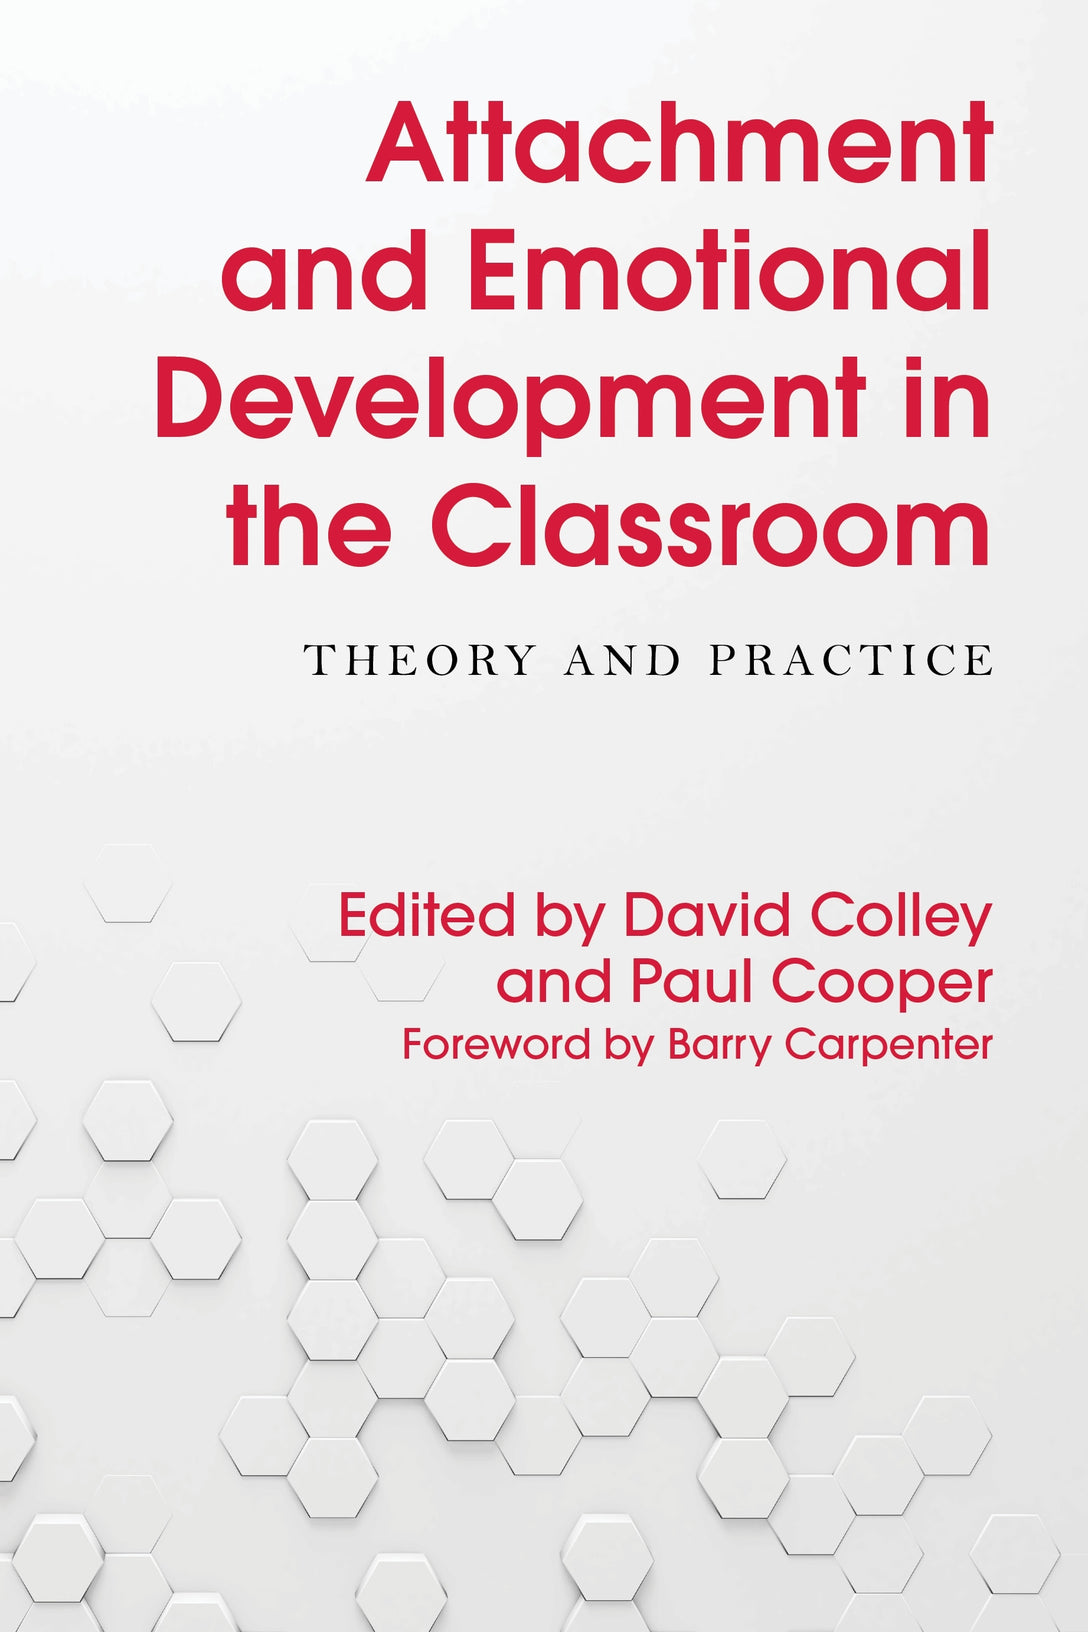 Attachment and Emotional Development in the Classroom by No Author Listed, Paul Cooper, Barry Carpenter, David Colley